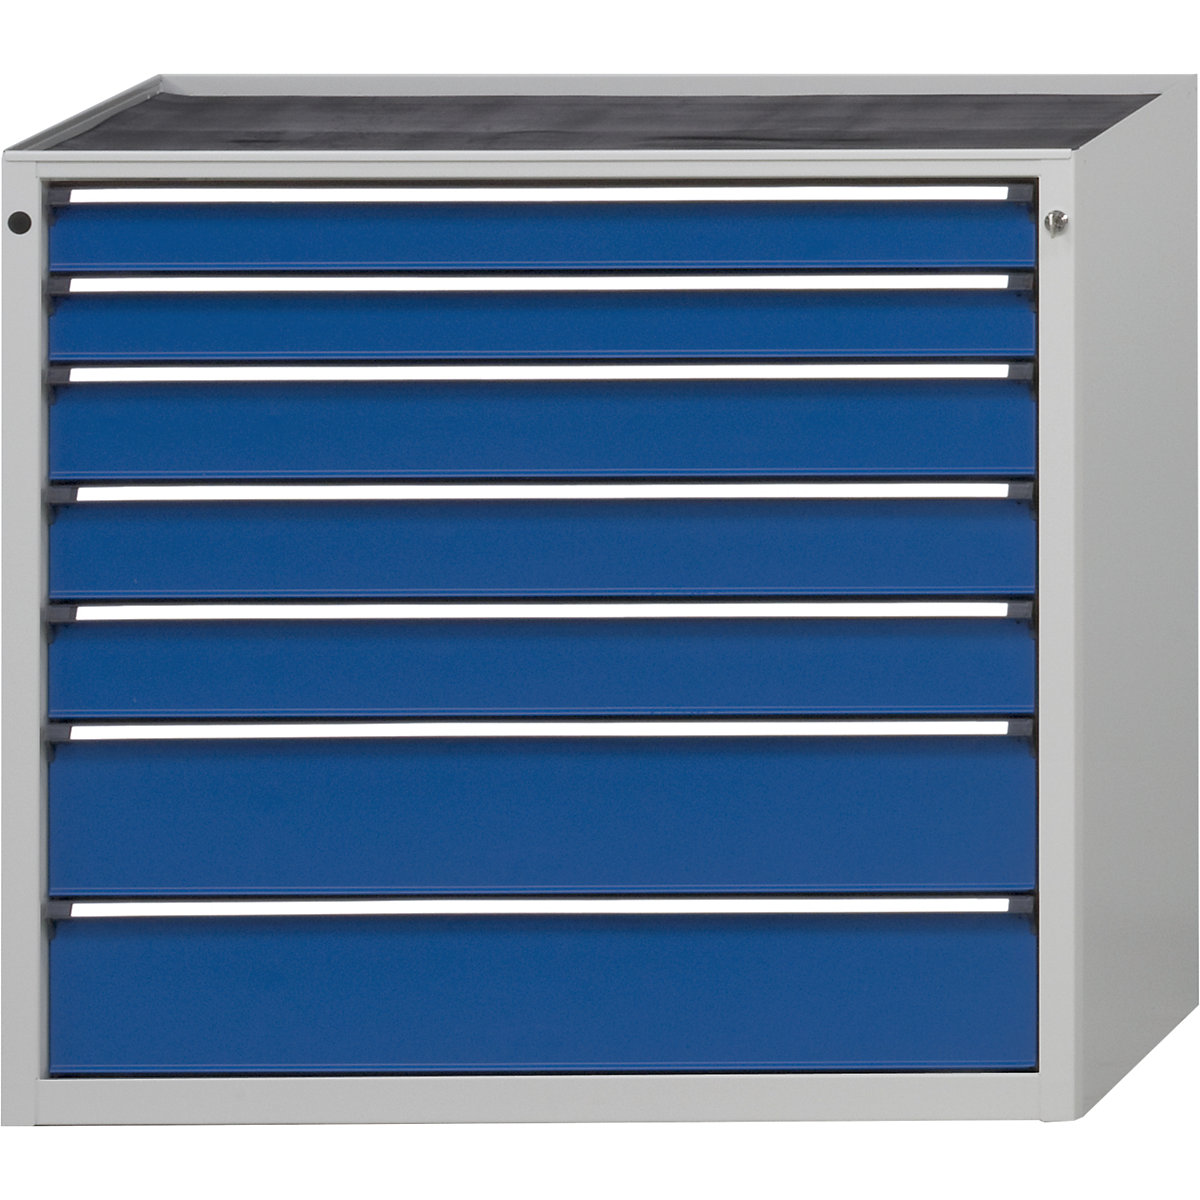 Drawer cupboard without worktop – ANKE, width 1060 mm, max. drawer load 200 kg, 7 drawers, front in gentian blue-6